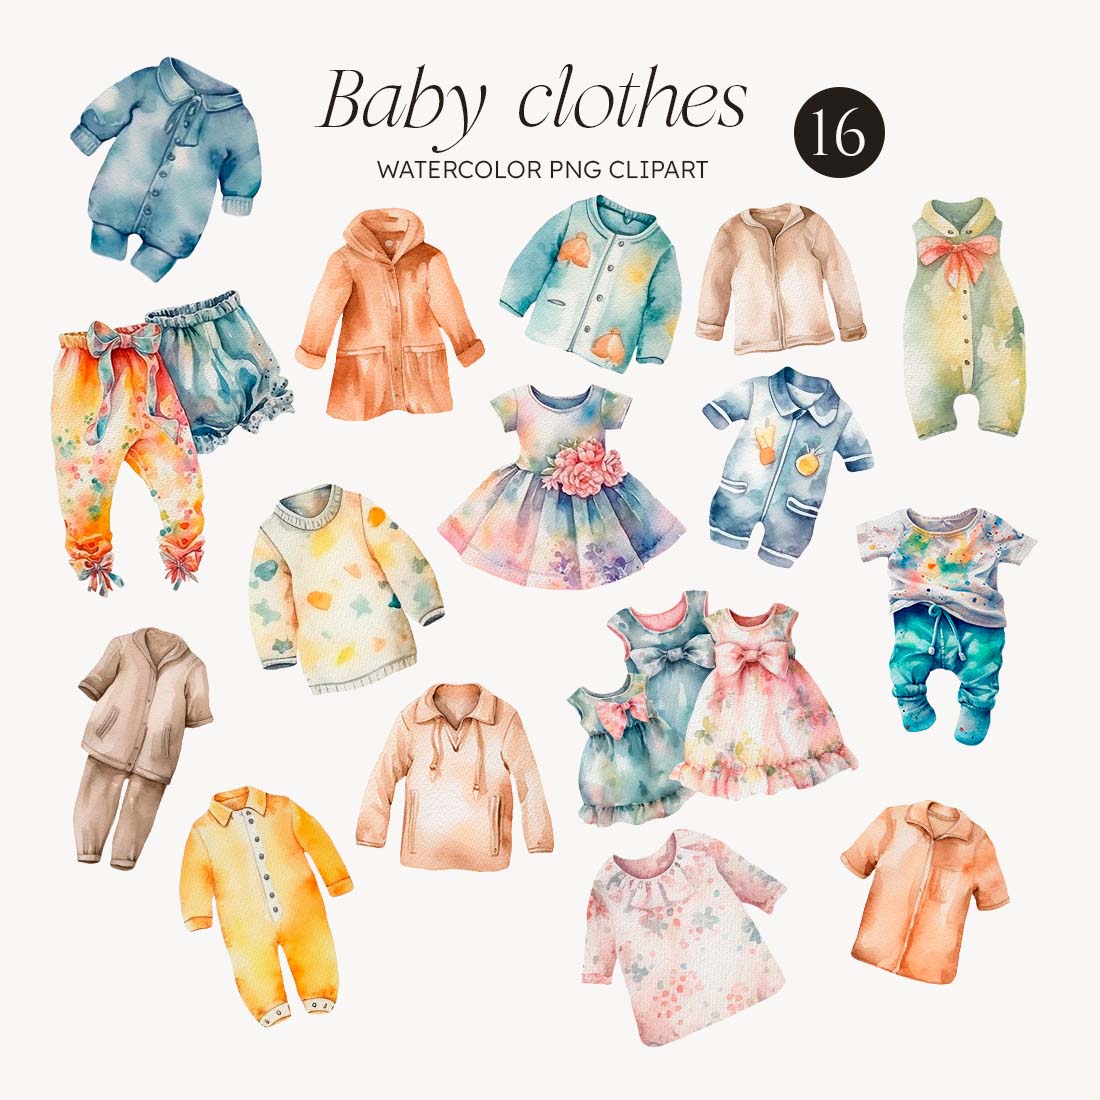 Baby clothes preview image.